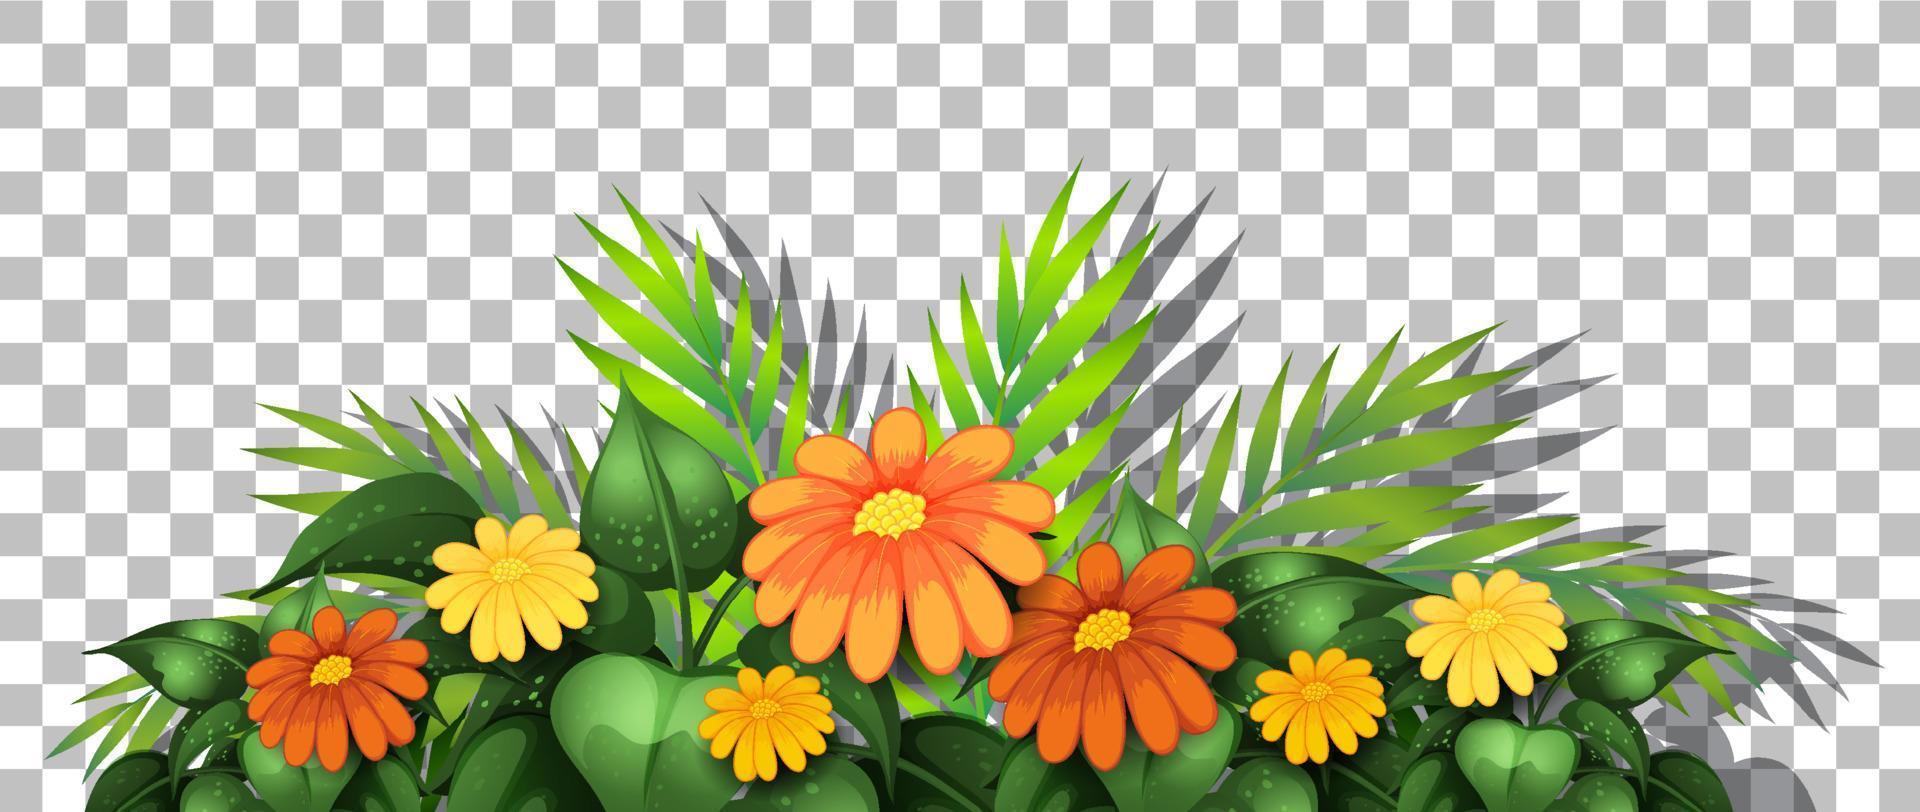 Flower bush with leaves on grid background vector